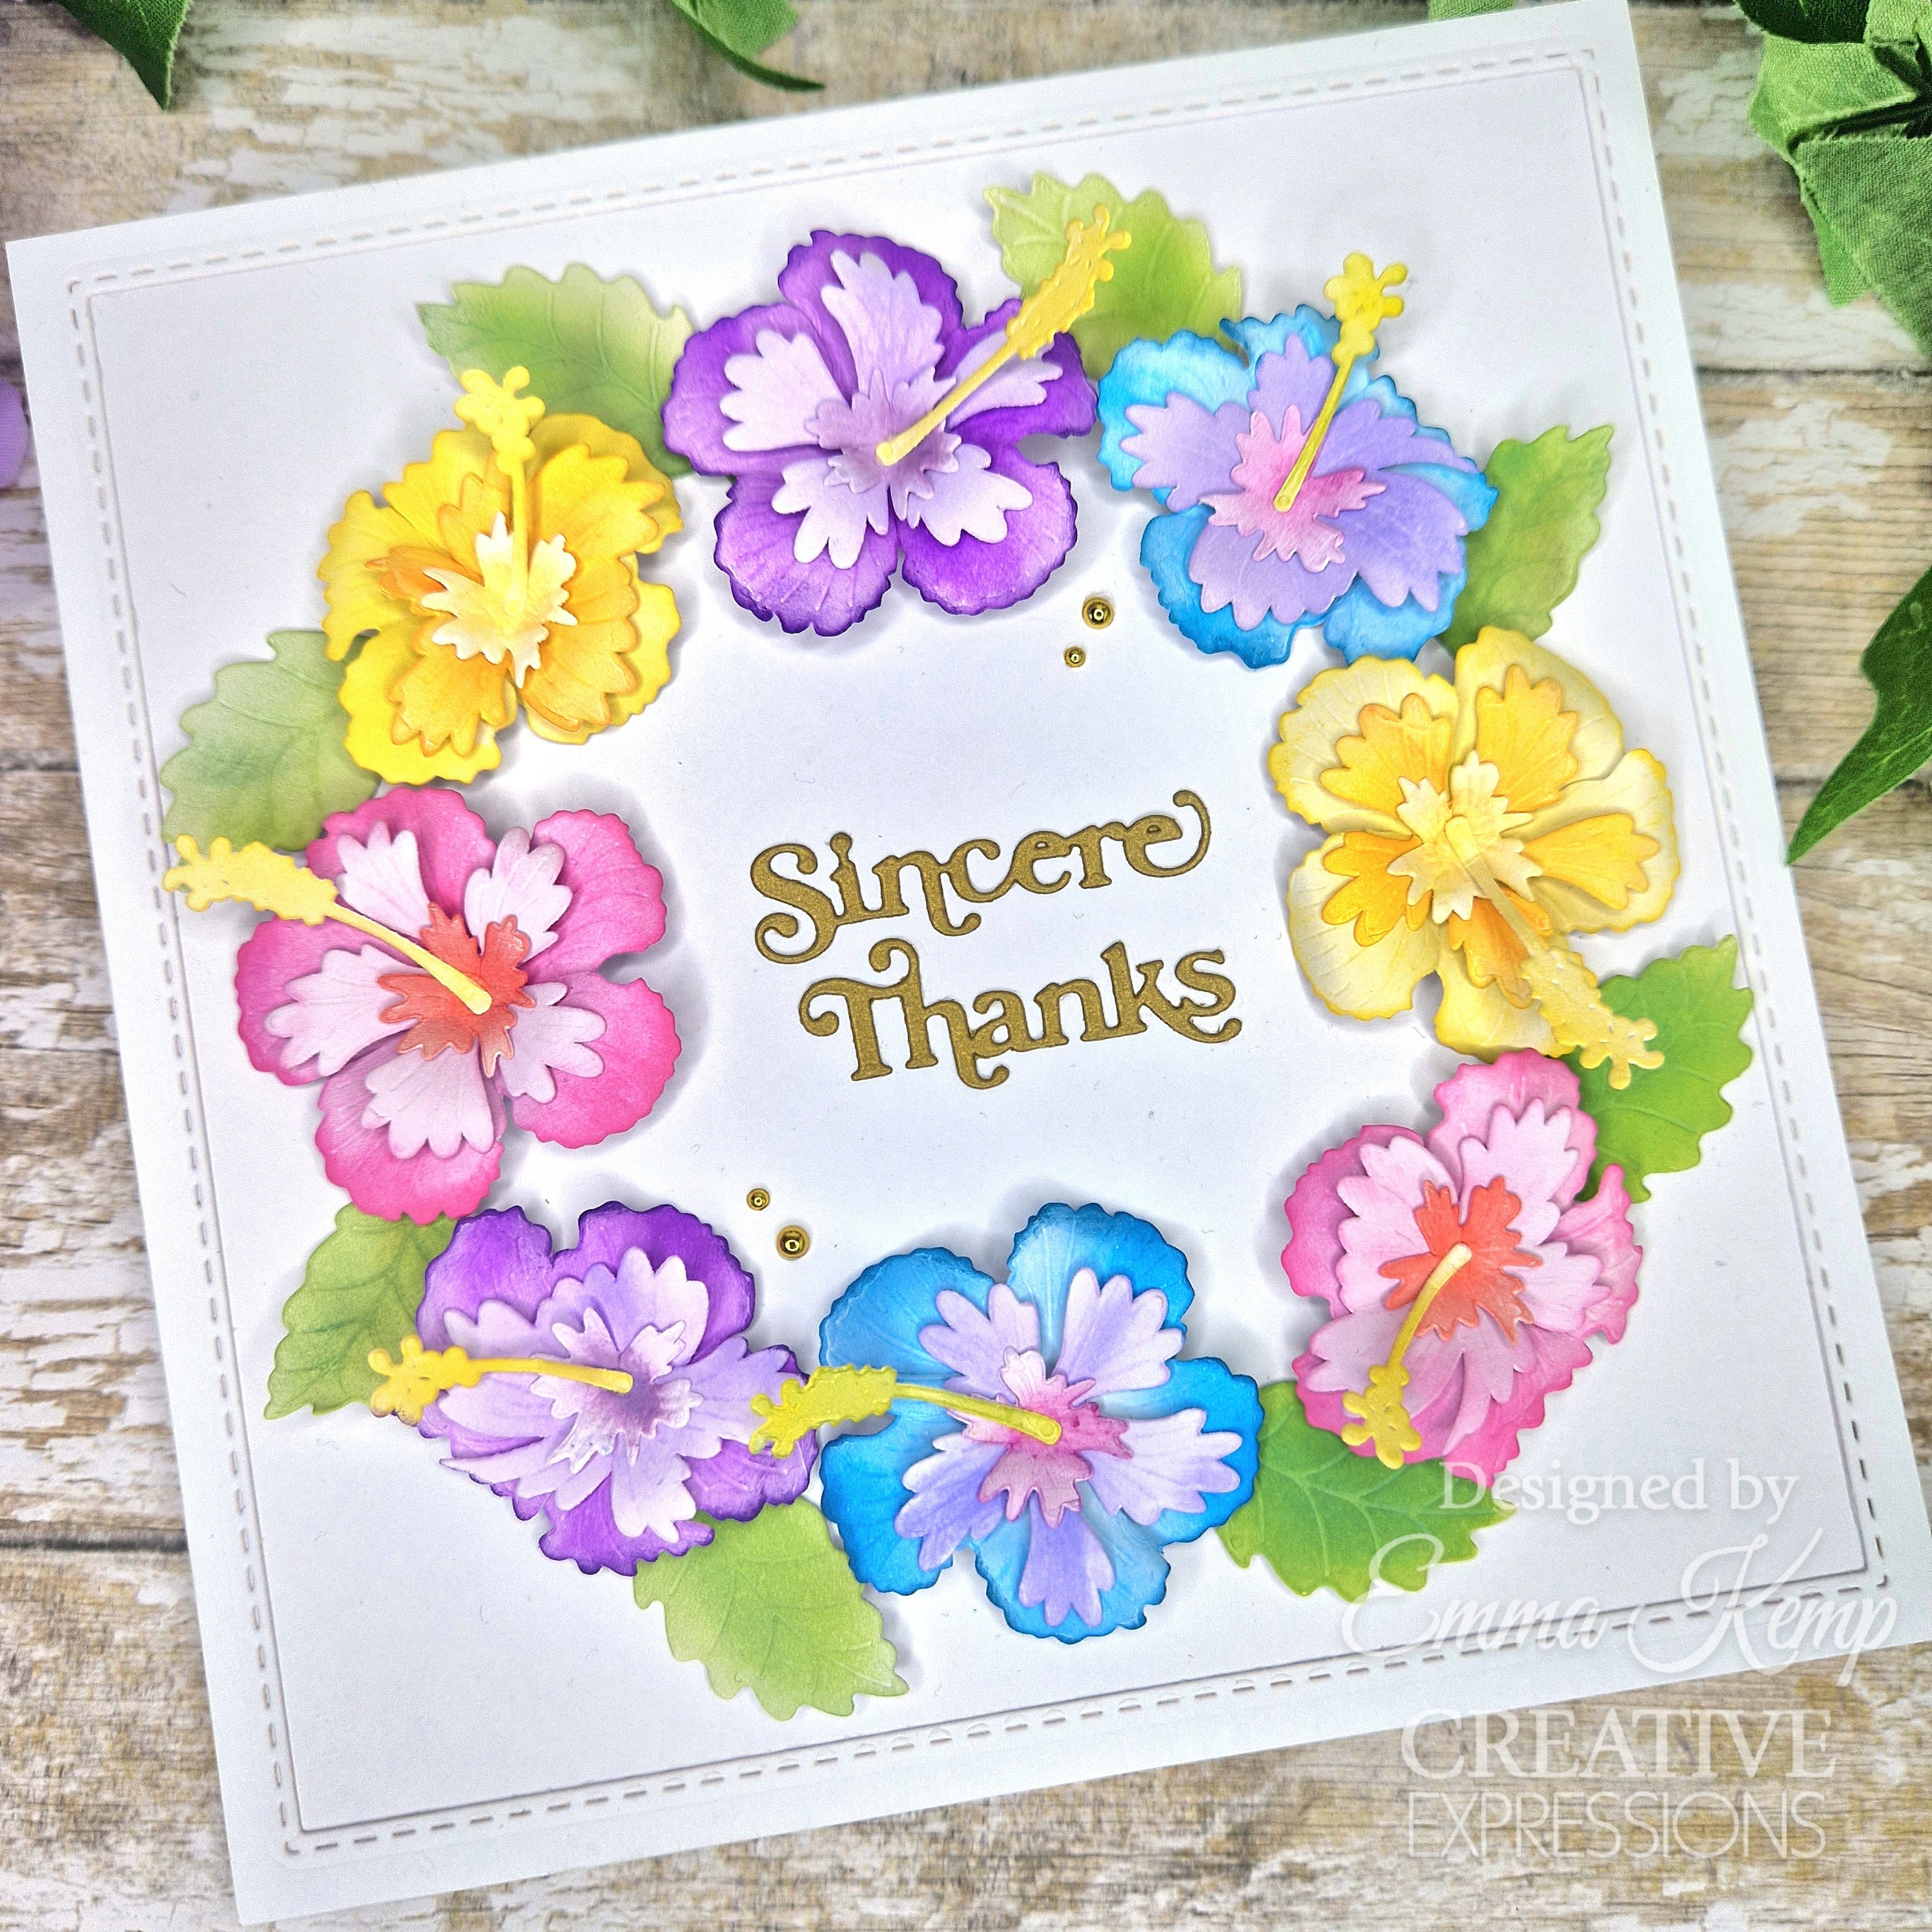 Creative Expressions Sue Wilson Mini Shadowed Sentiments Sincere Thanks Craft Die